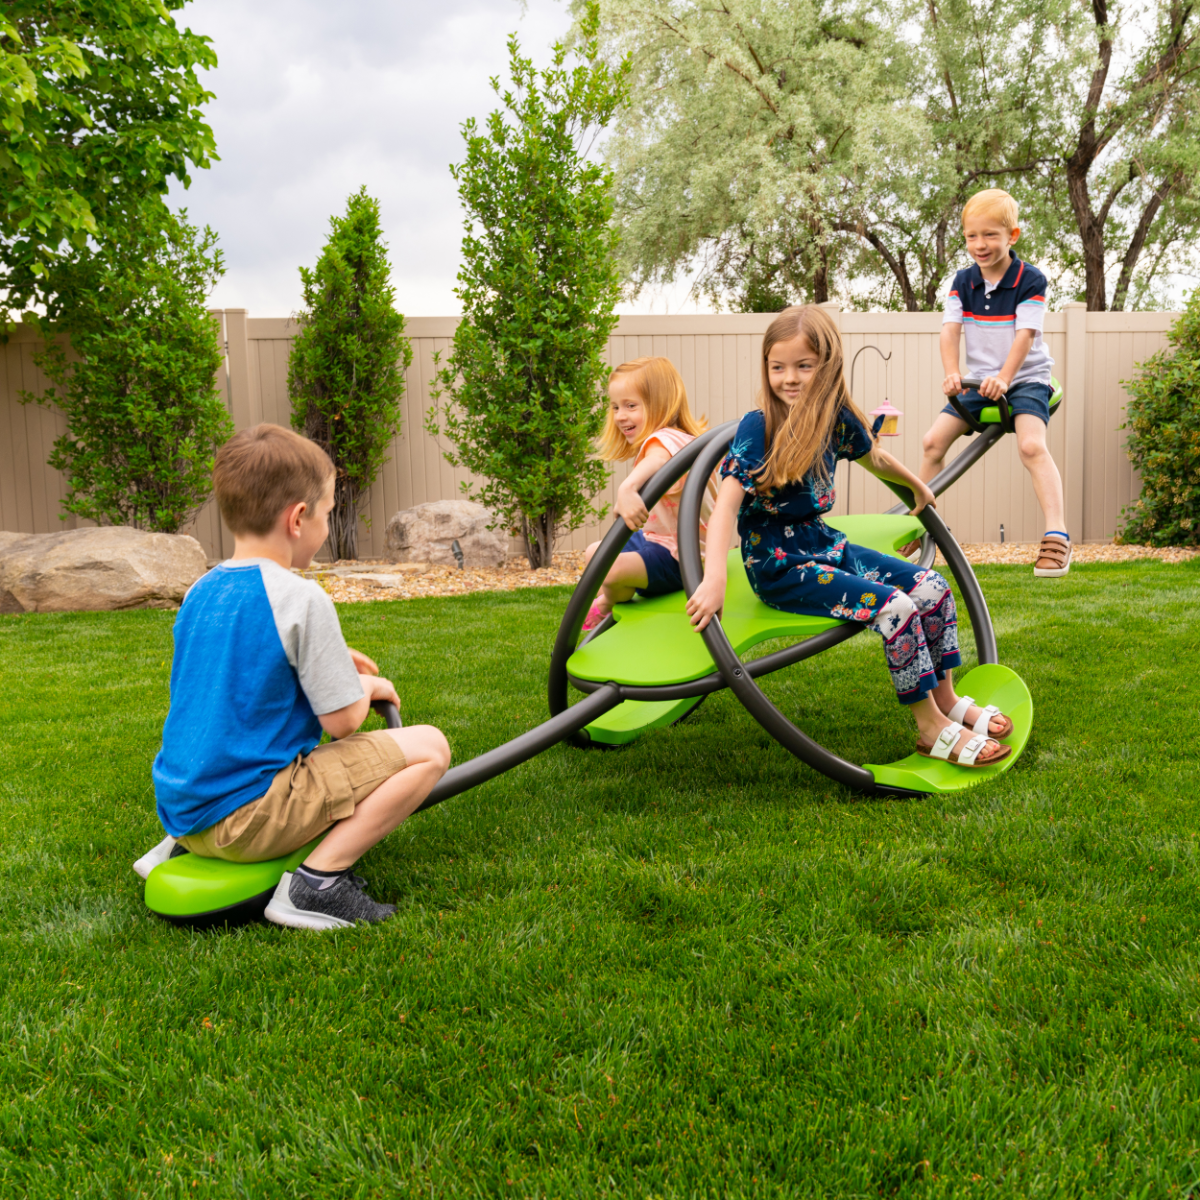 Oval Teeter Totter (90993)